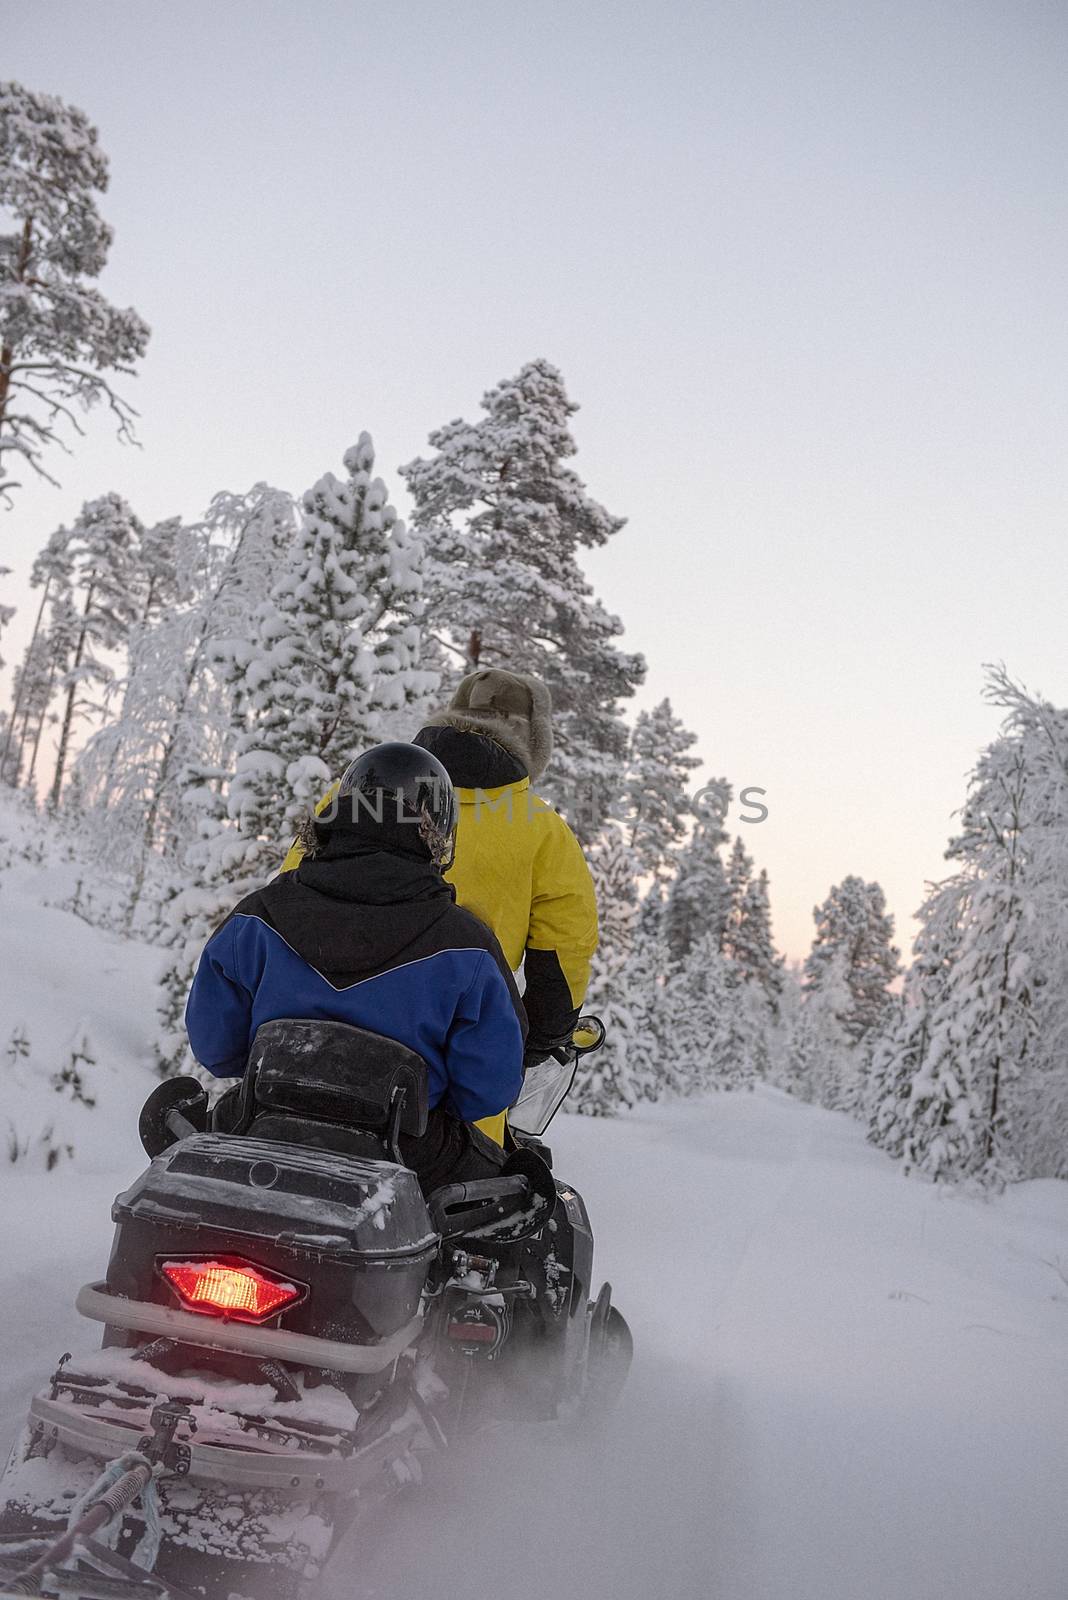 Finland, Inari - January 2019: 2 people riding on a snowmobile through the wilds of Lapland